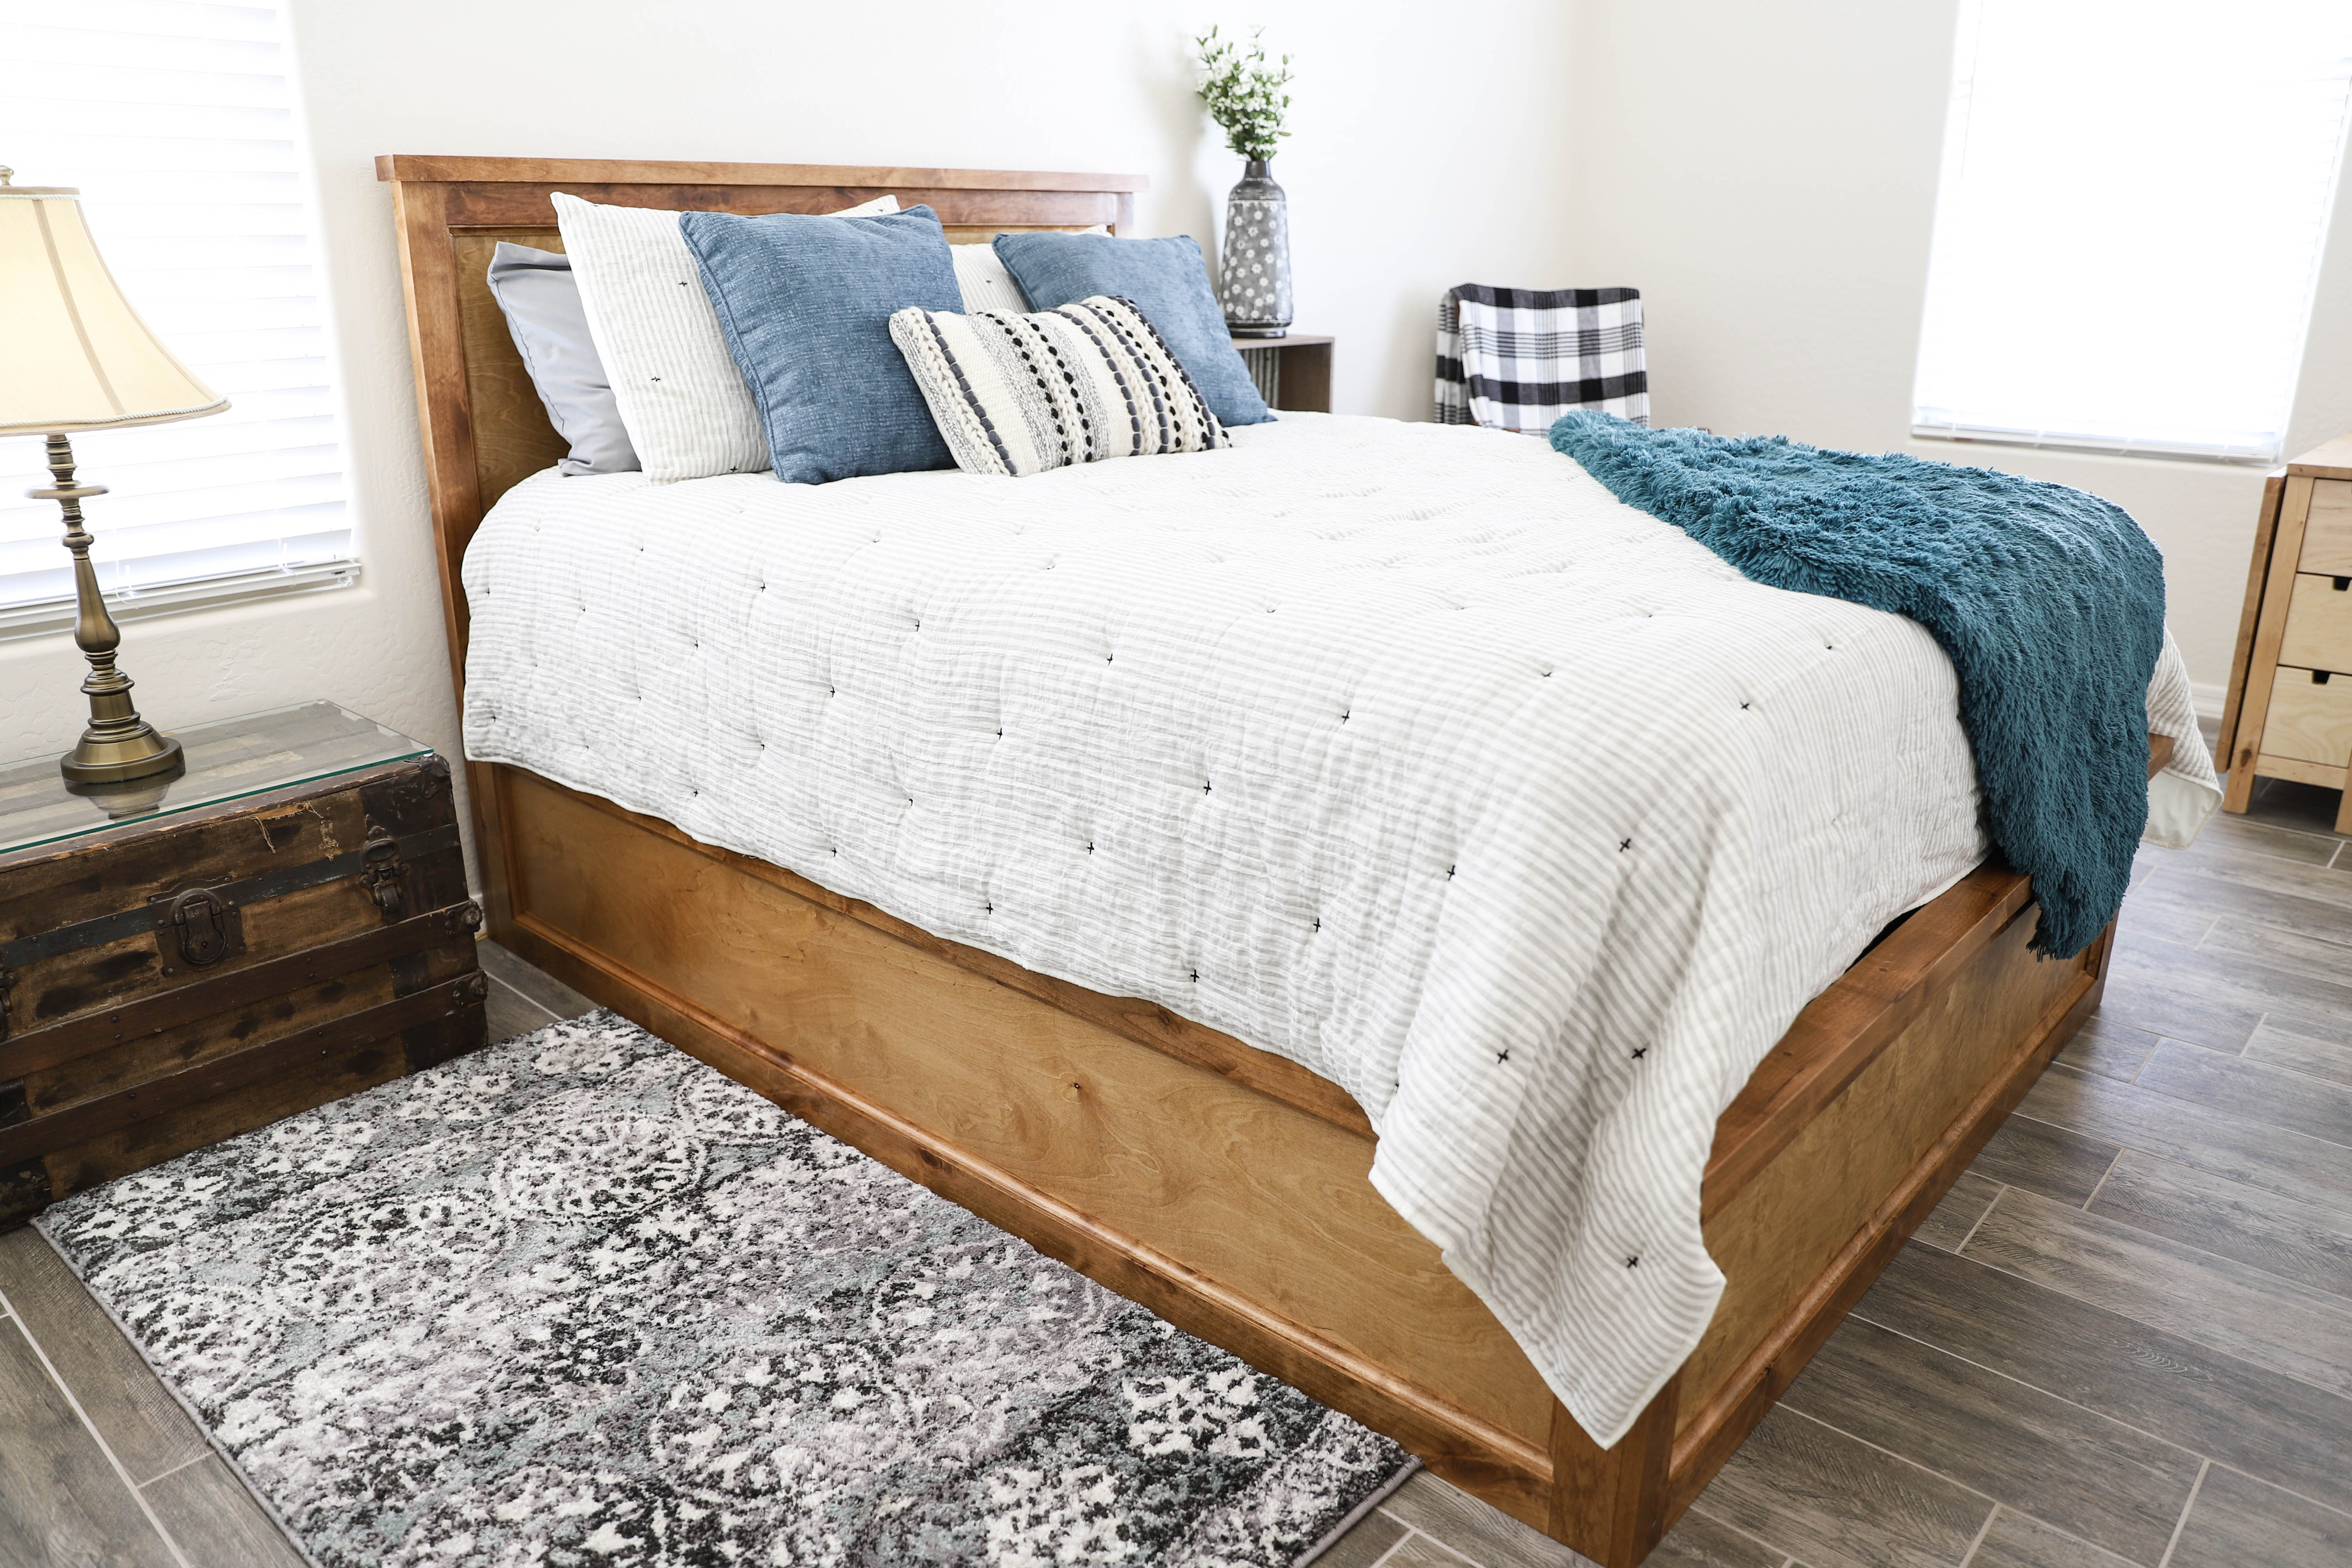 How To Build A Queen Size Storage Bed, King Platform Bed With Storage Underneath Plans